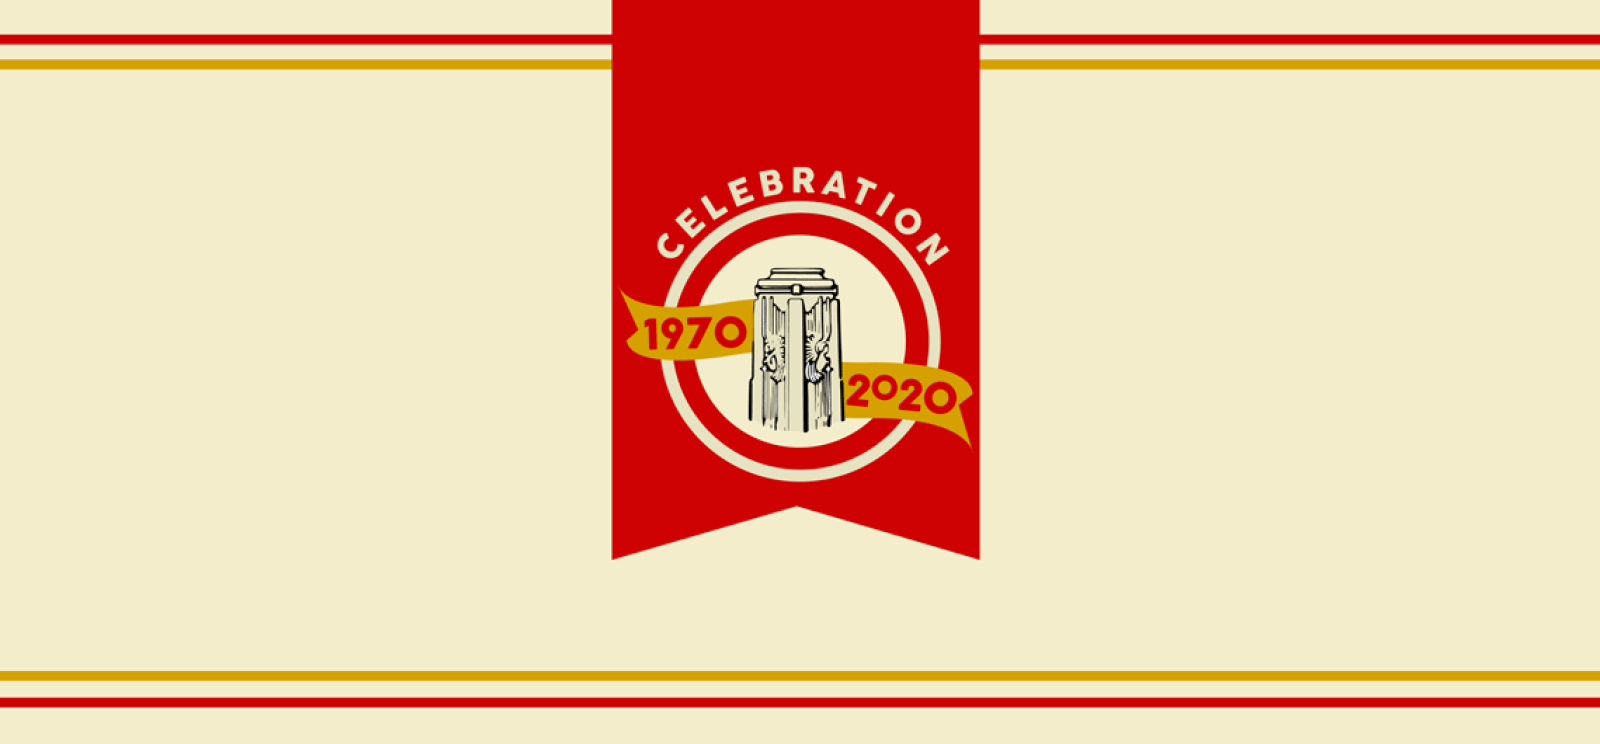 A red and gold banner with the text 'Celebration 1970 2020'